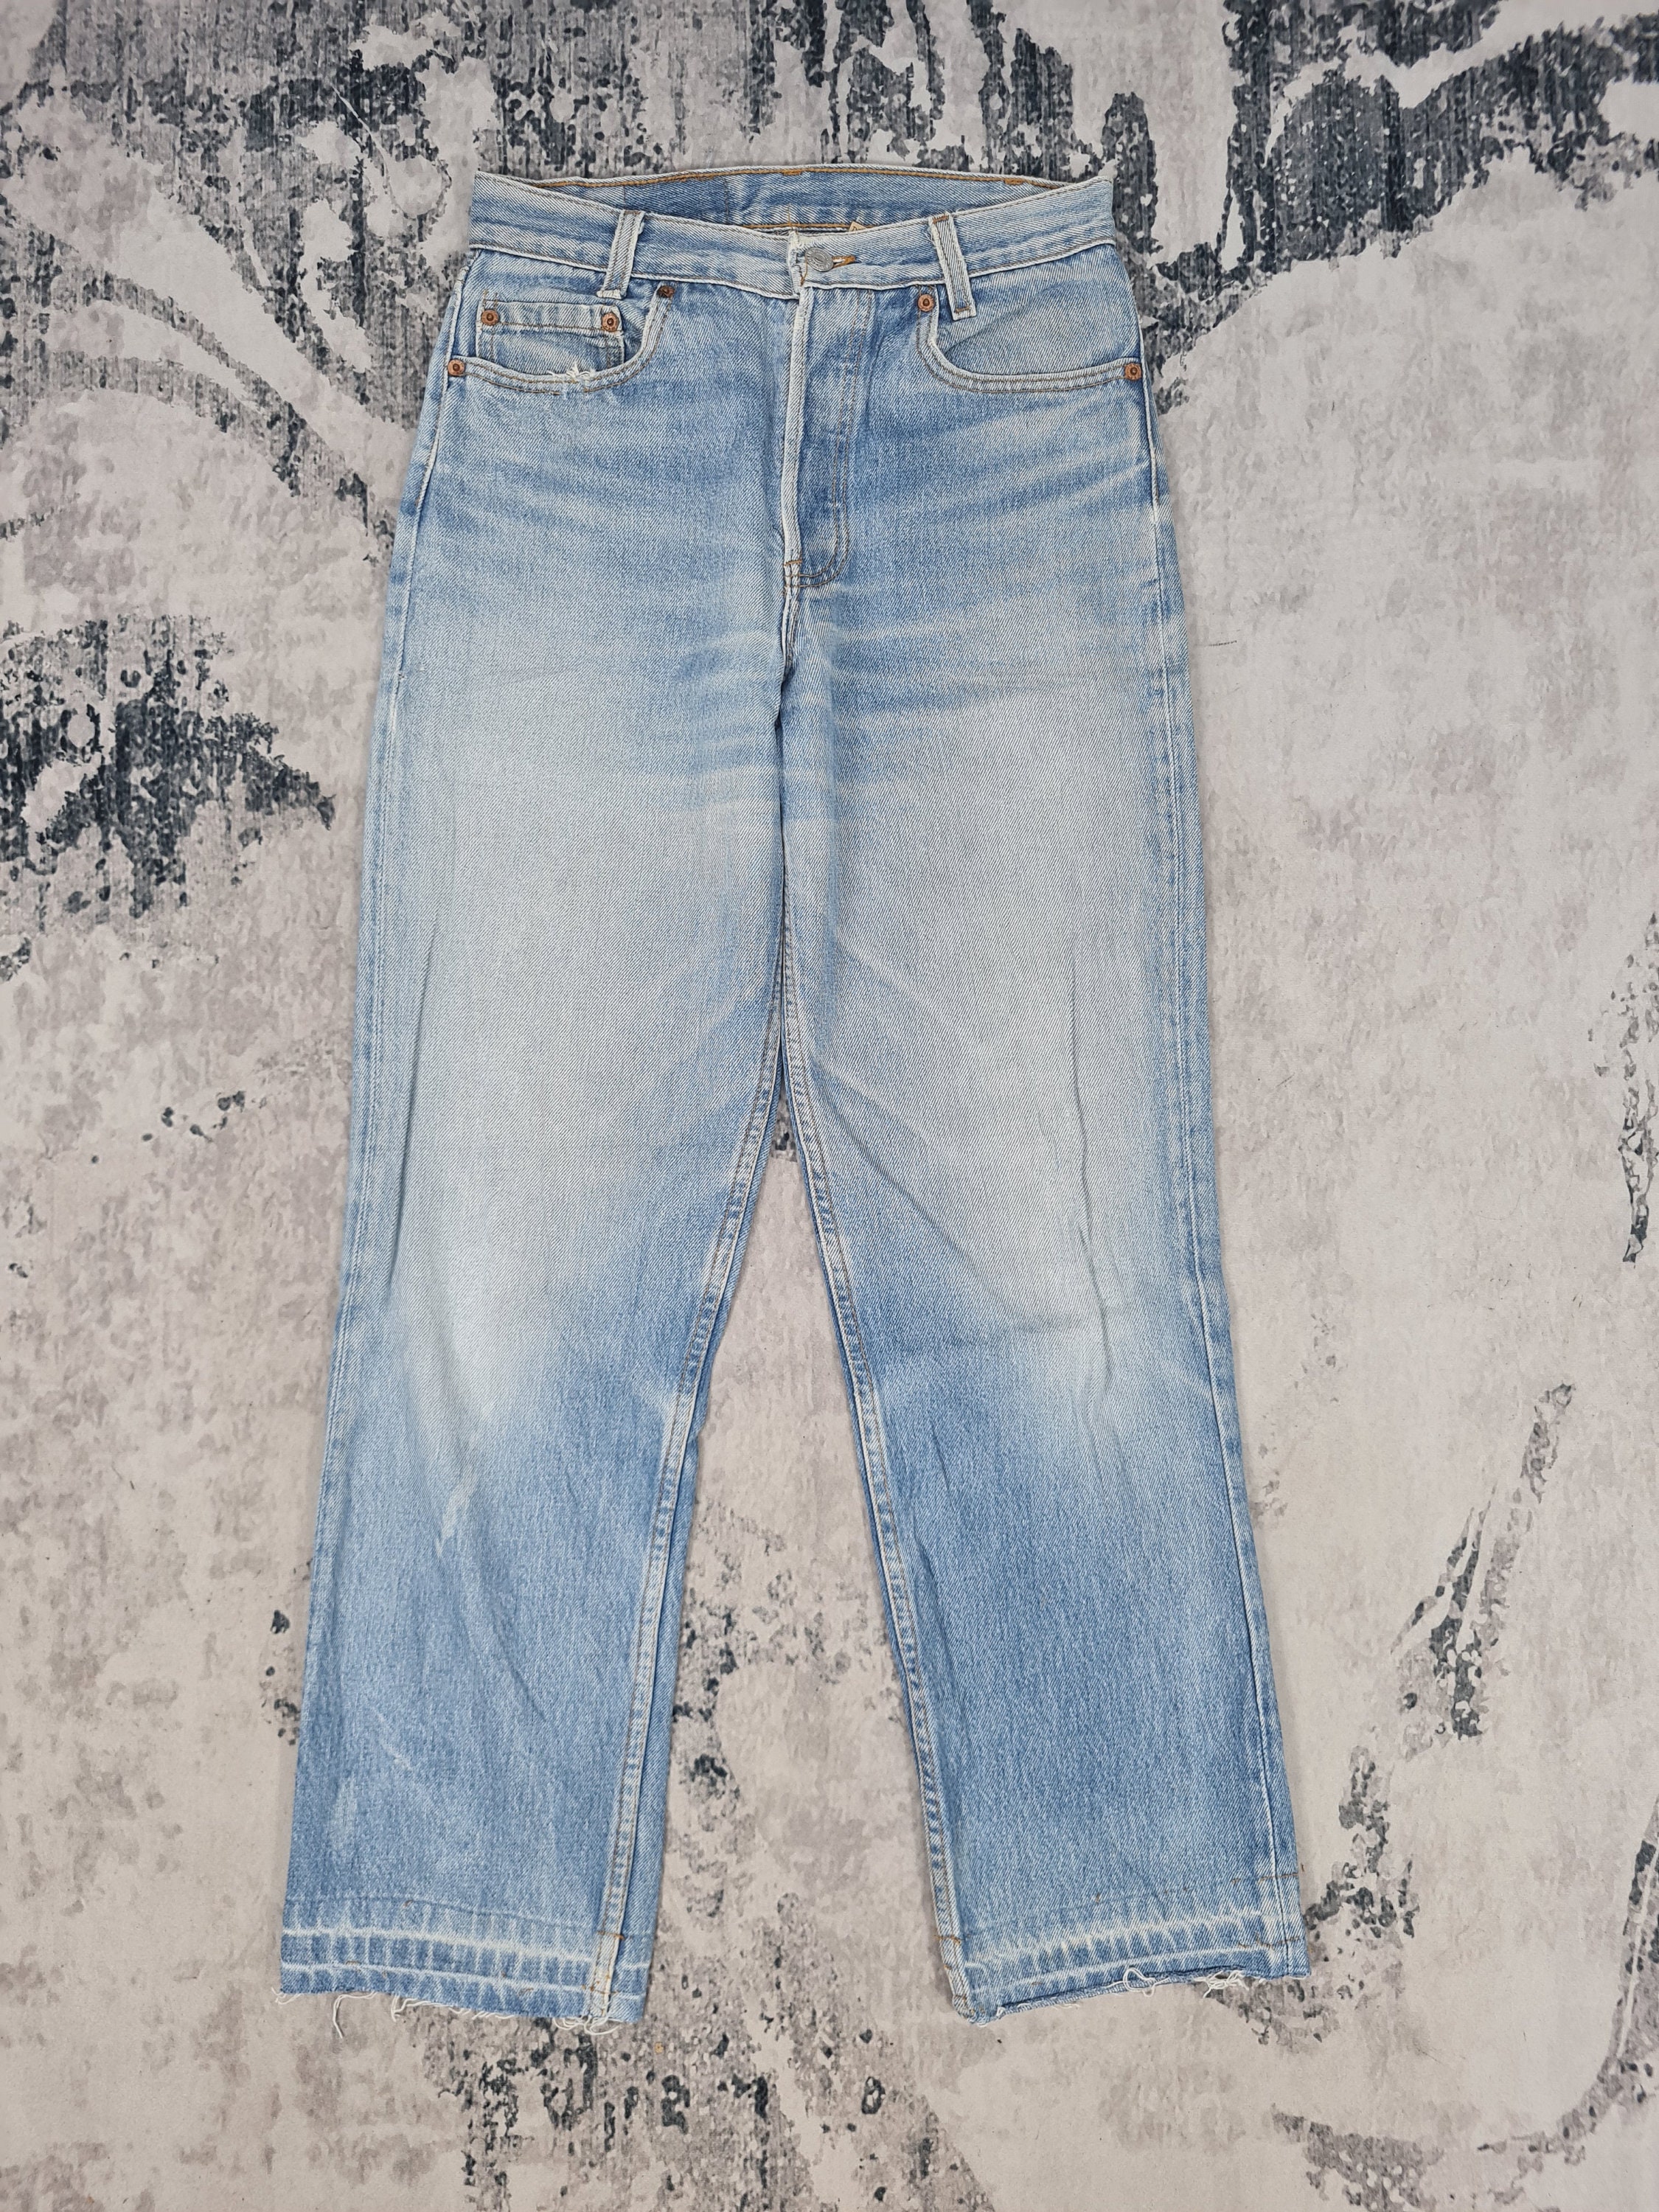 Vintage LEVIS 501 Student Levis Sun Faded Distressed - Etsy